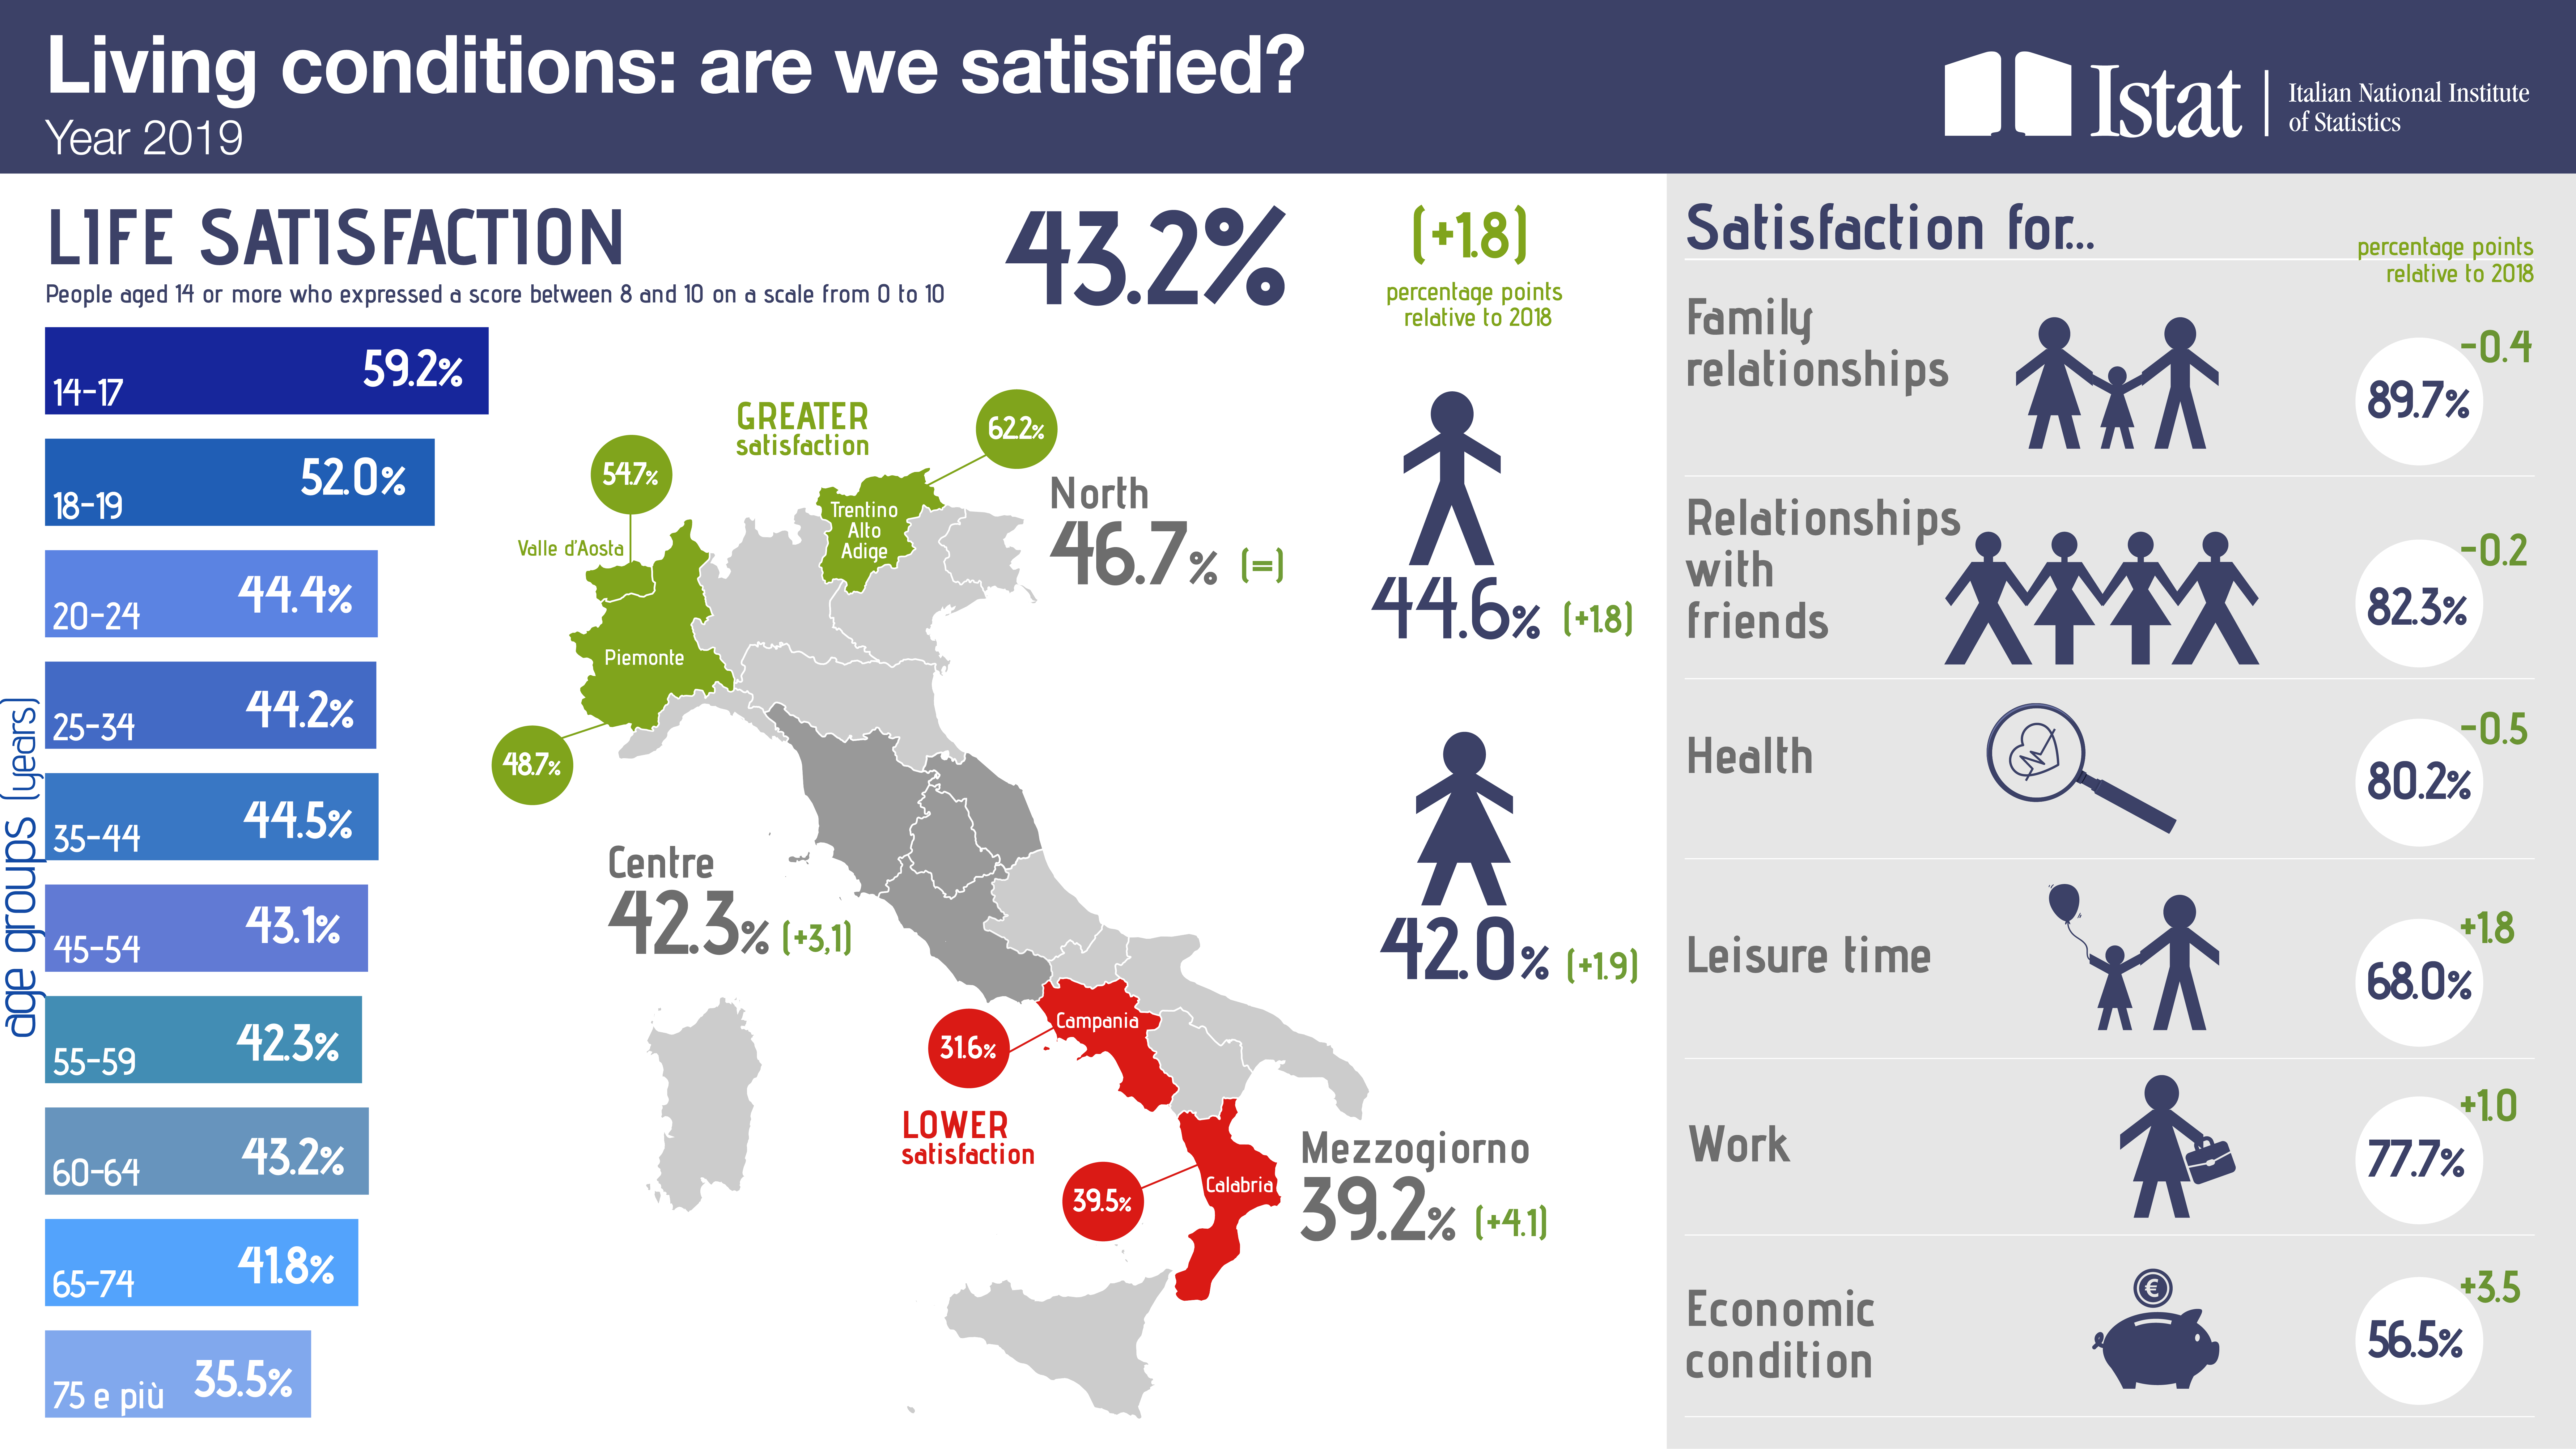 Infographic on Living conditions: are we satisfied? Year 2019